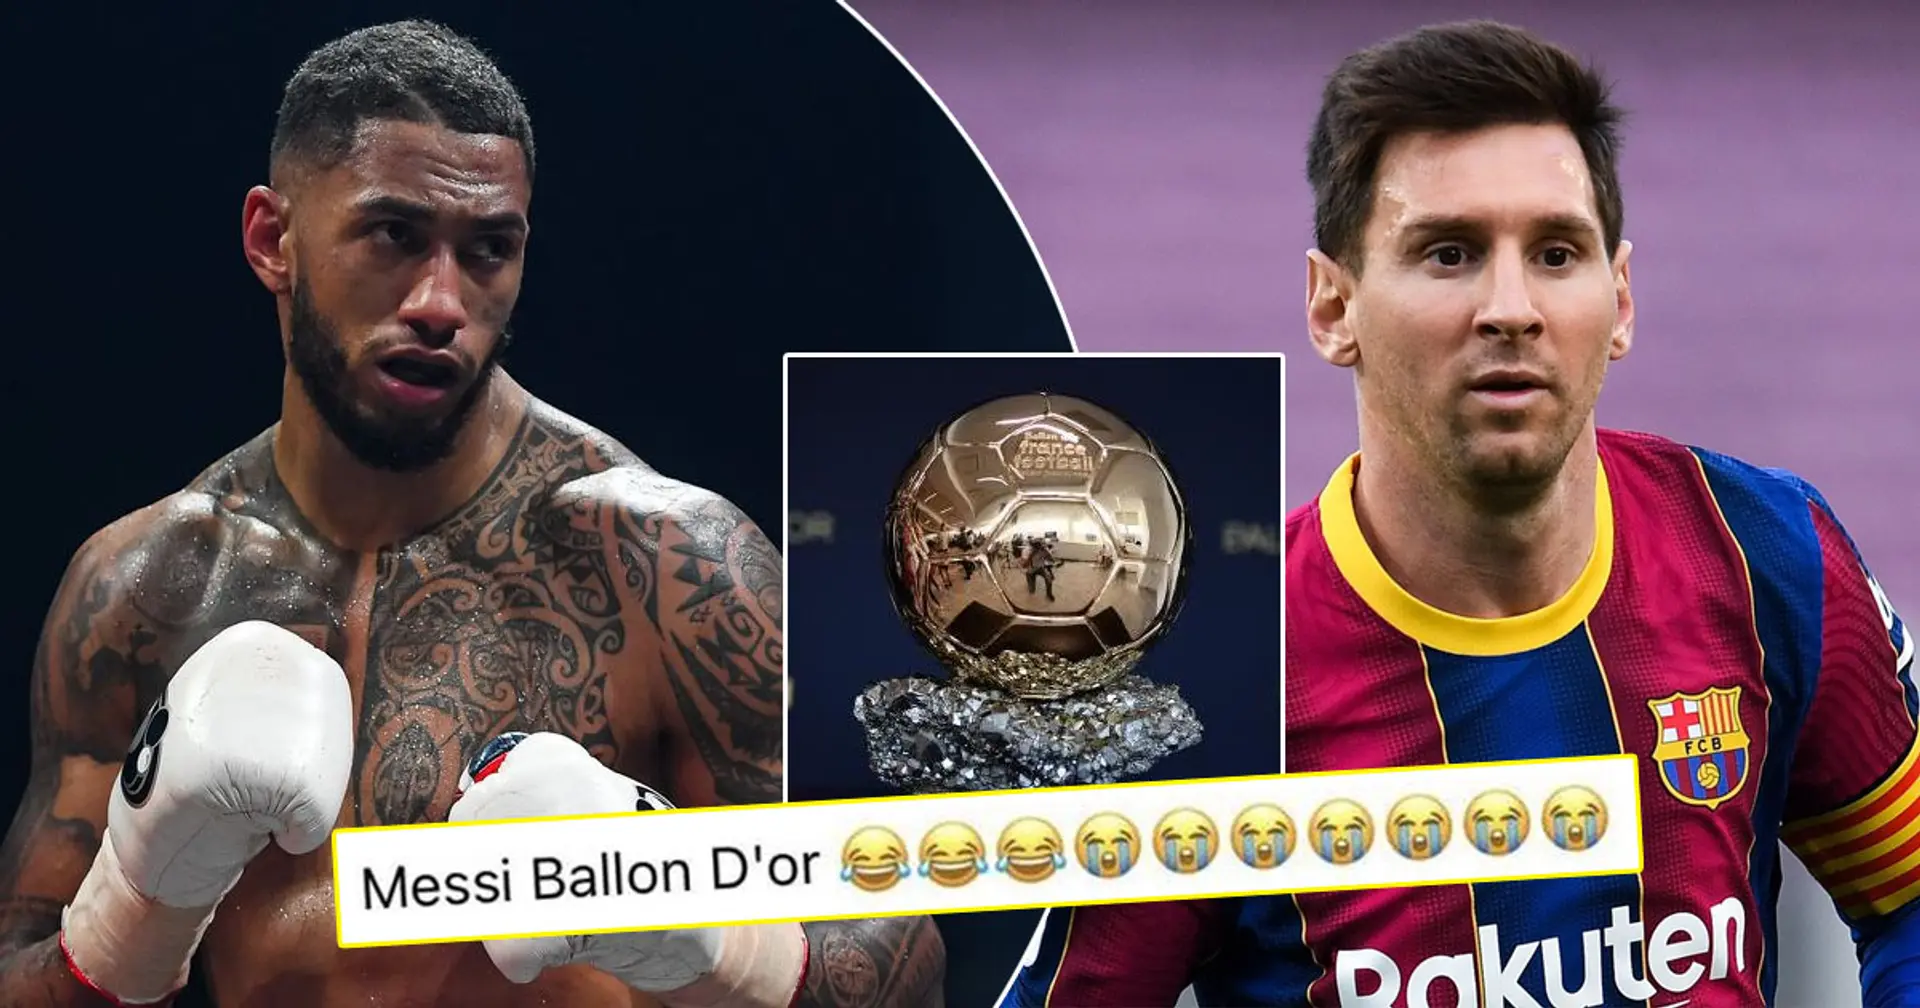 'If Messi wins, it'll be the most busted Ballon d'Or in history': French pro boxer Tony Yoka rips into Leo